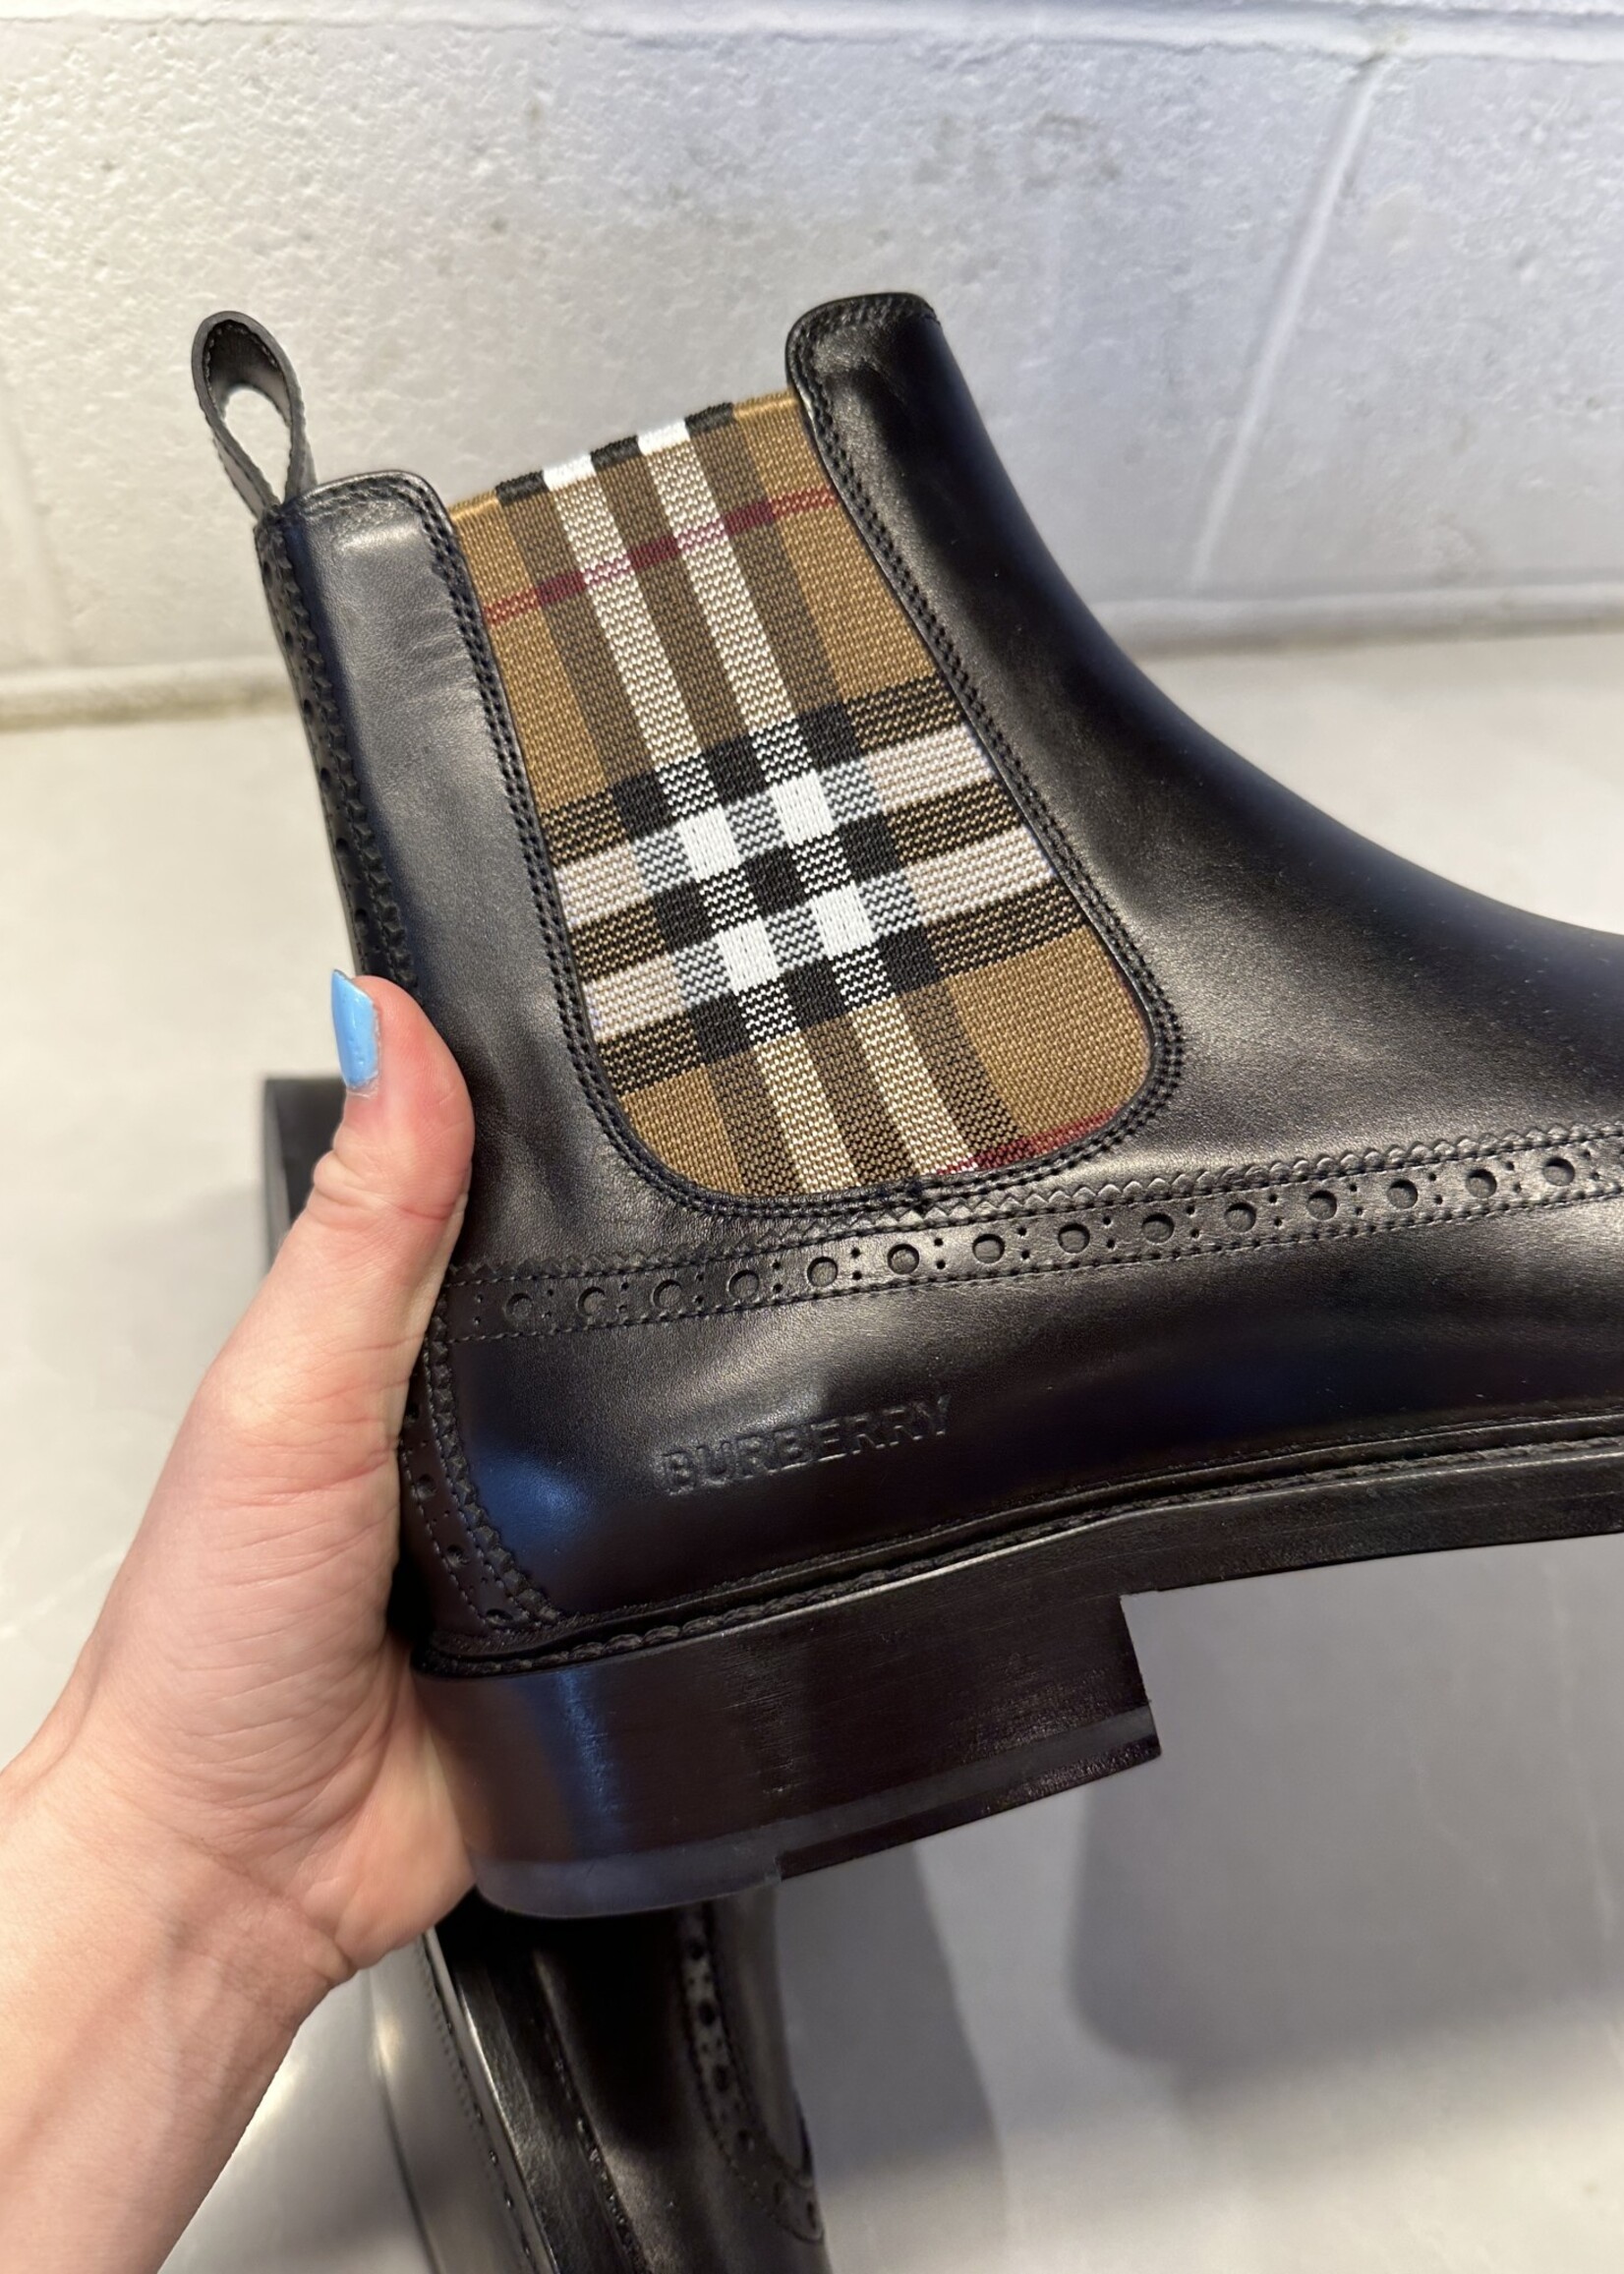 Burberry 'Tanner' Black Chelsea Boots (Retail: $900)